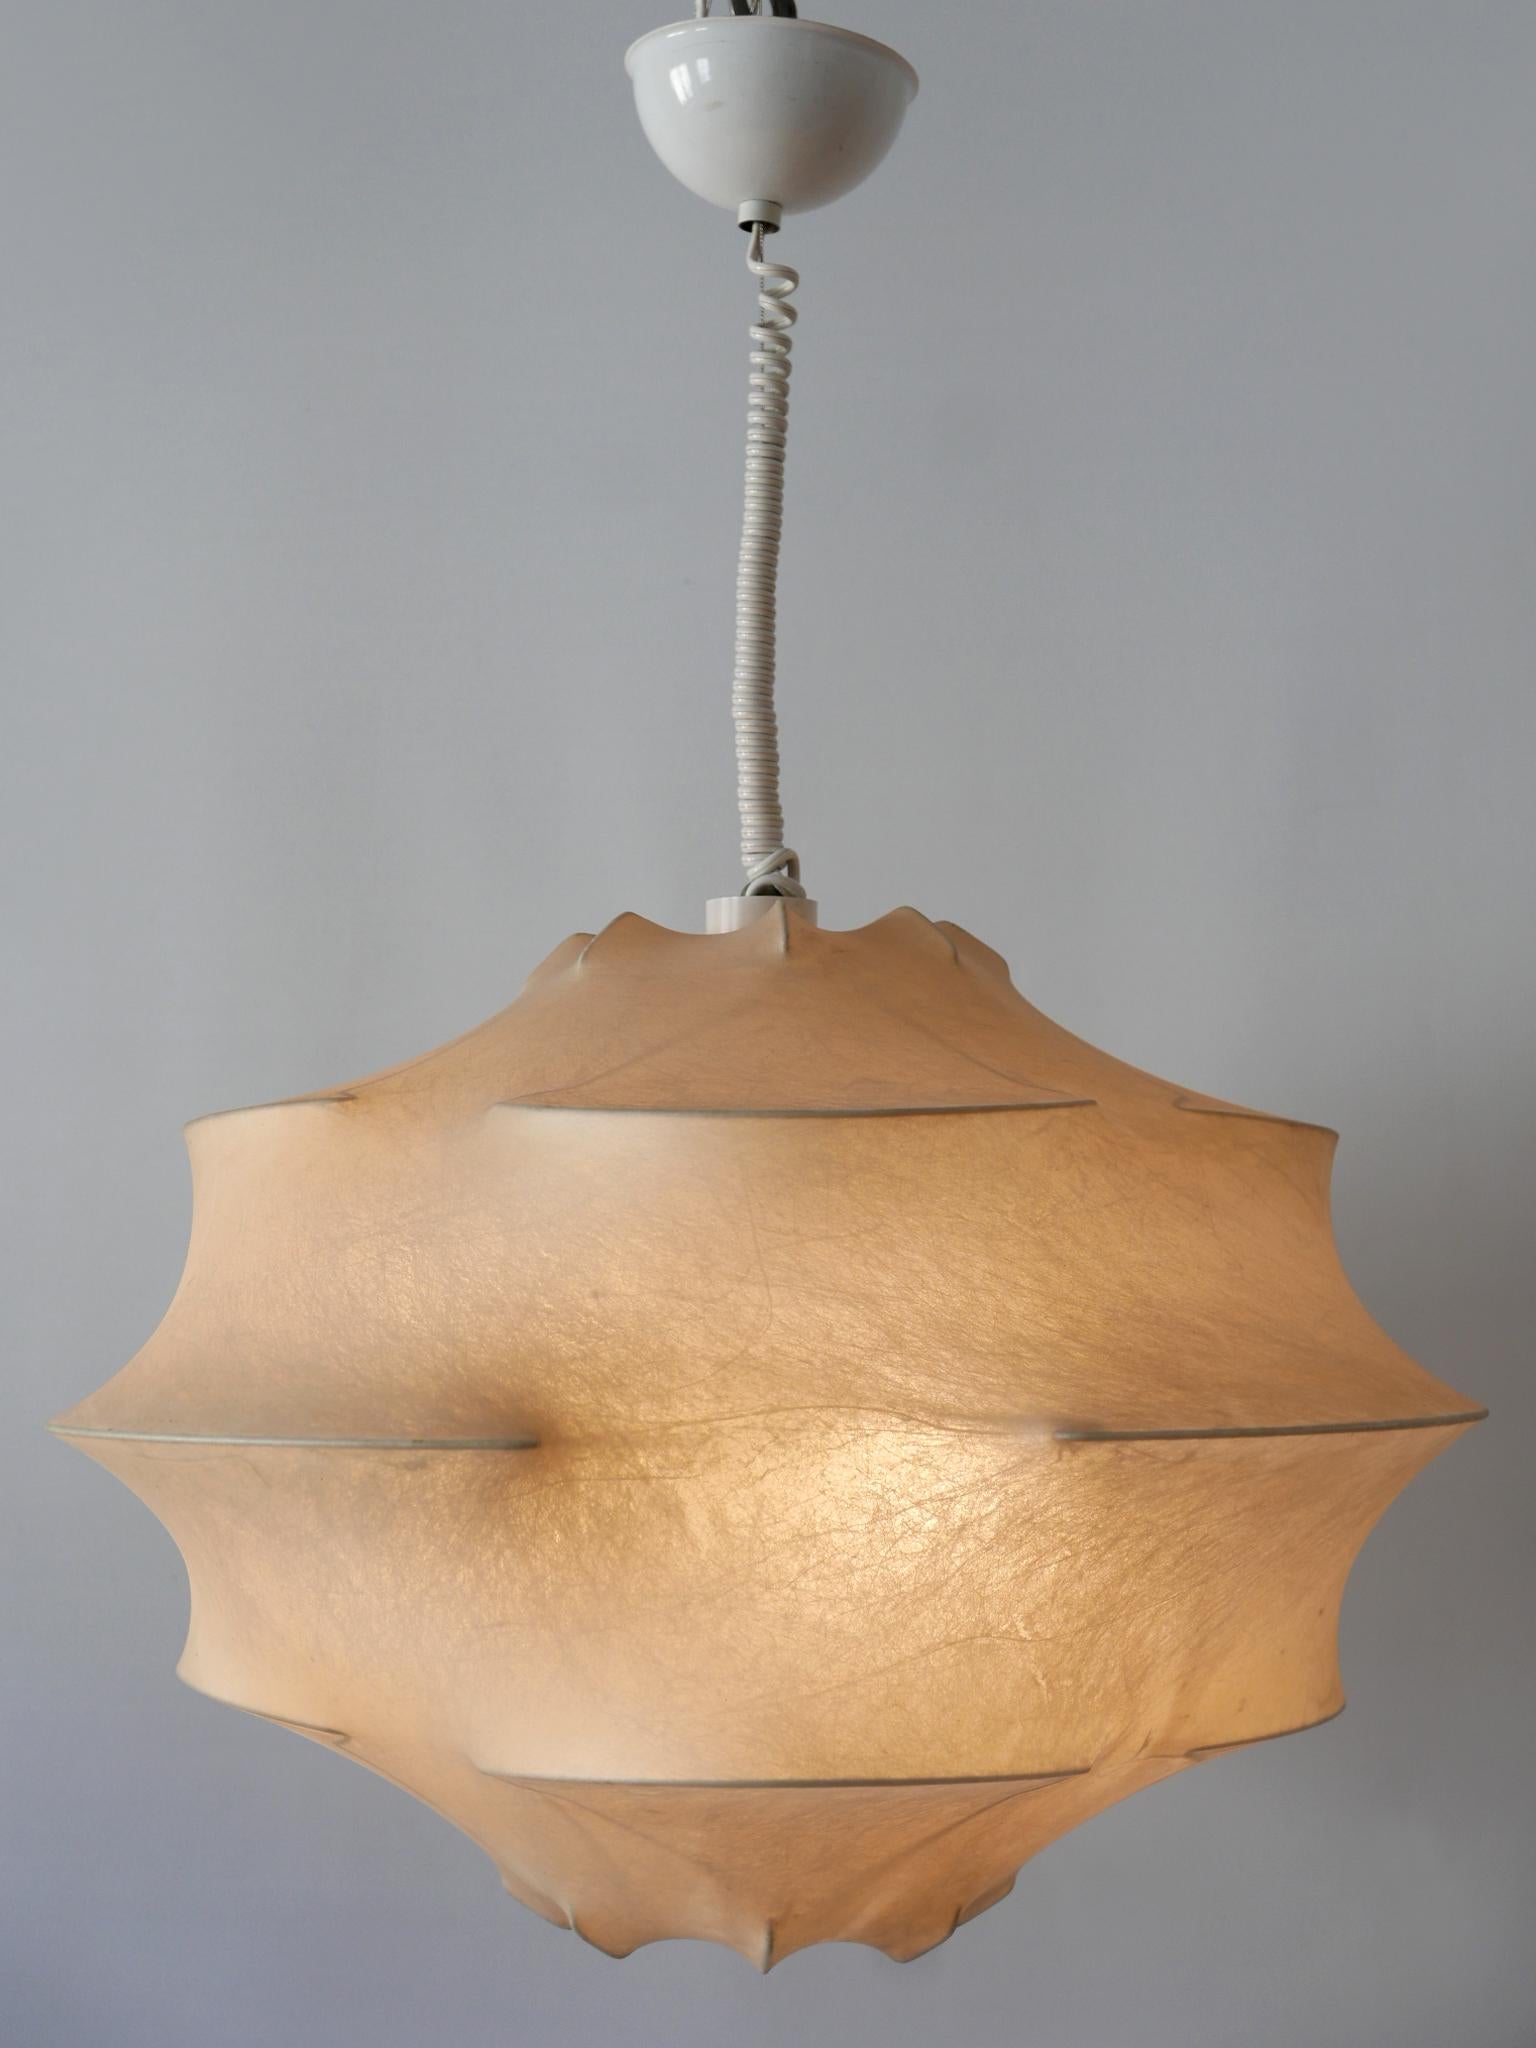 Italian XL Mid-Century Modern Cocoon Pendant Lamp or Hanging Light by Flos Italy, 1960s For Sale